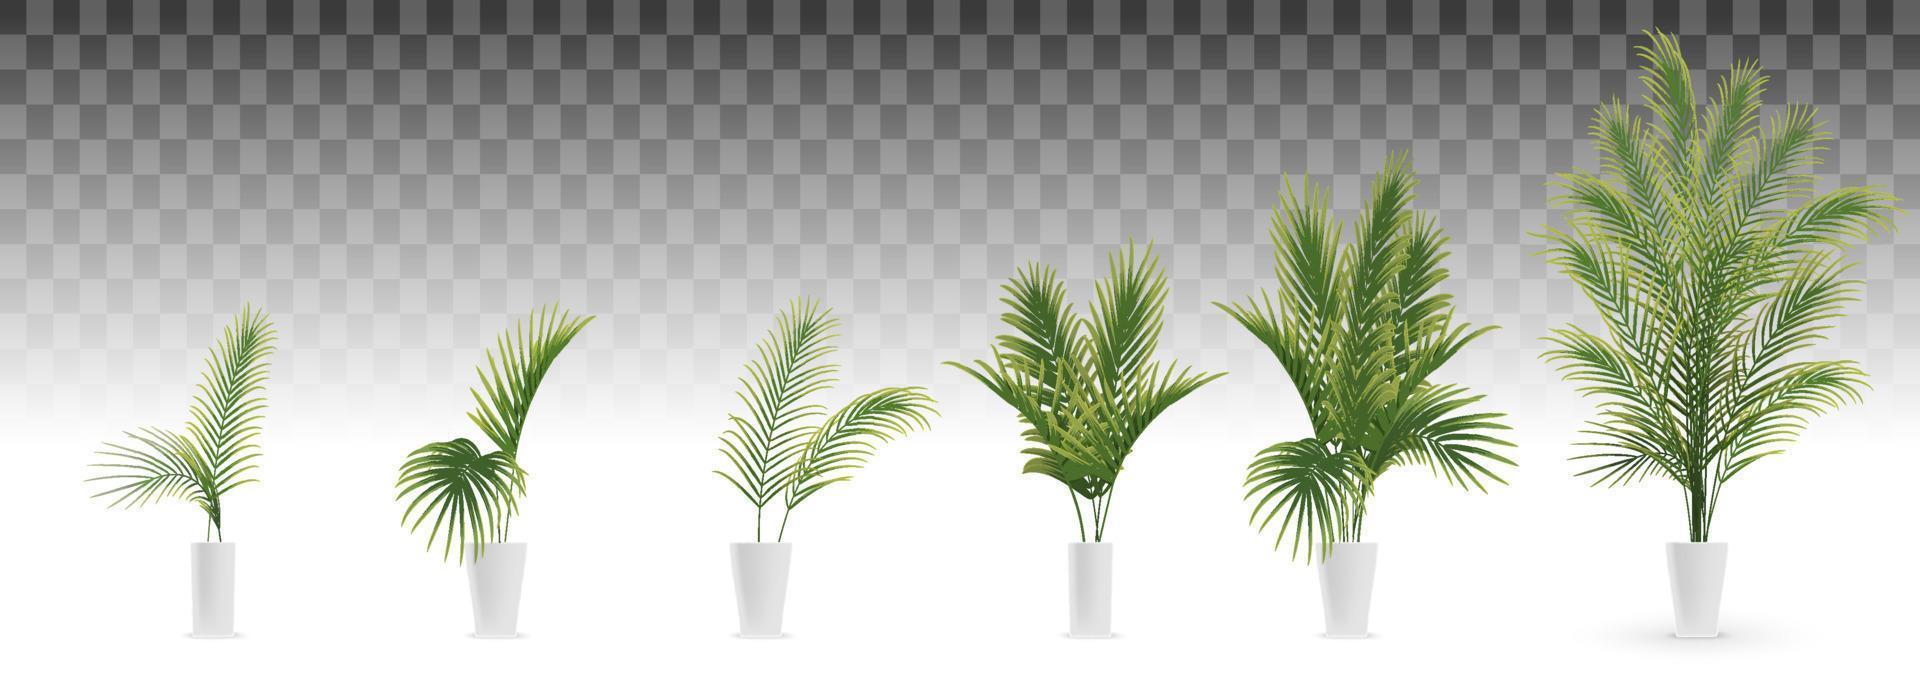 set of palm tree in white vase vector